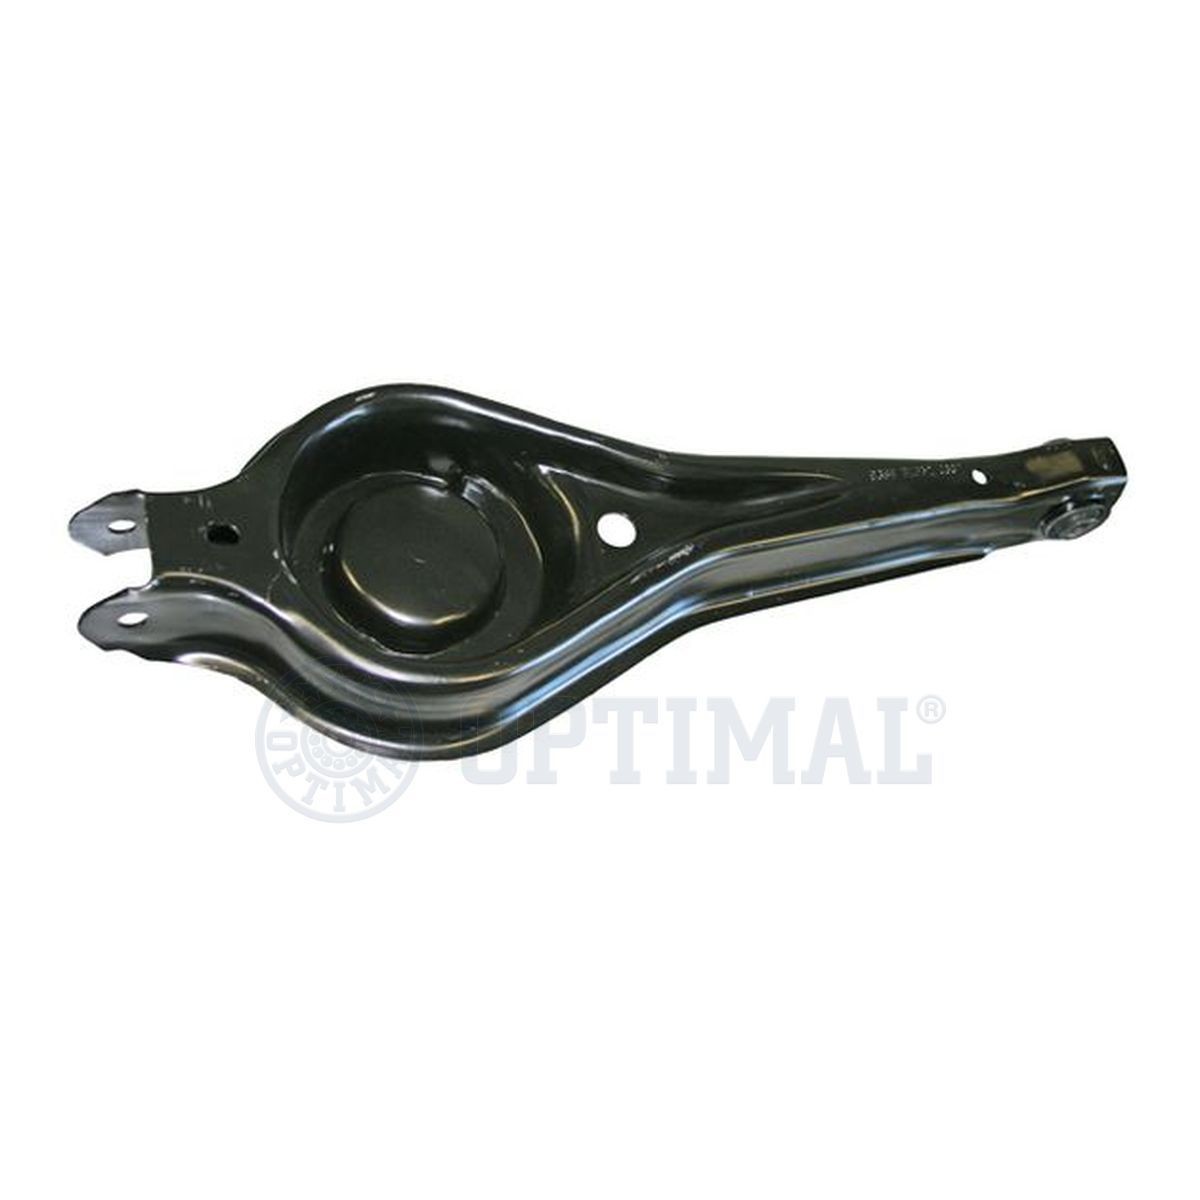 OPTIMAL G5-762 Suspension arm with rubber mount, Rear Axle, Lower, both sides, Trailing Arm, Sheet Steel